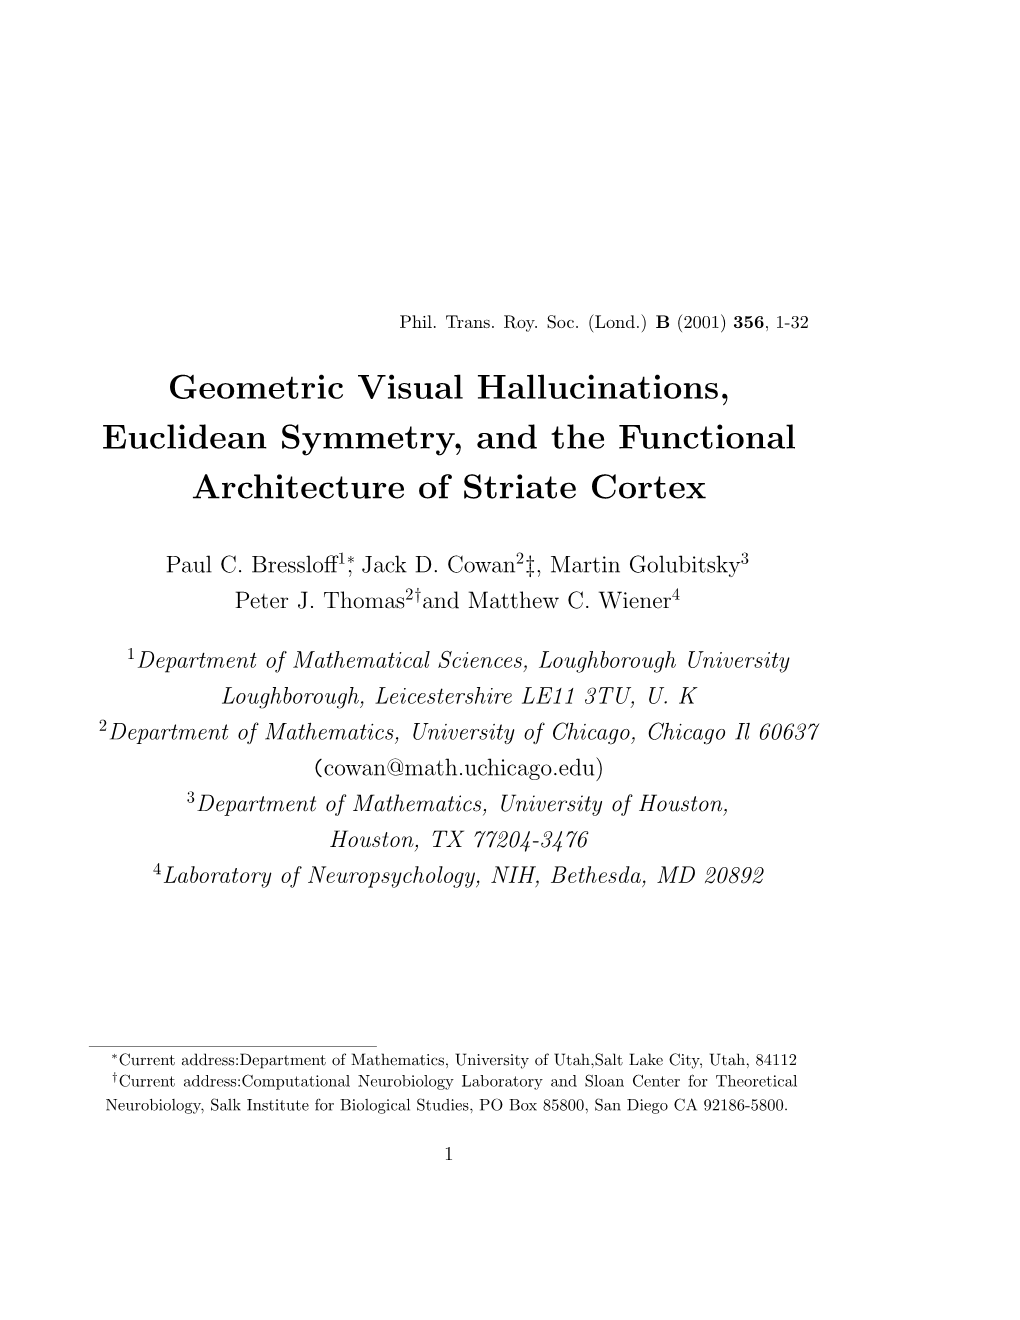 Geometric Visual Hallucinations, Euclidean Symmetry, and the Functional Architecture of Striate Cortex